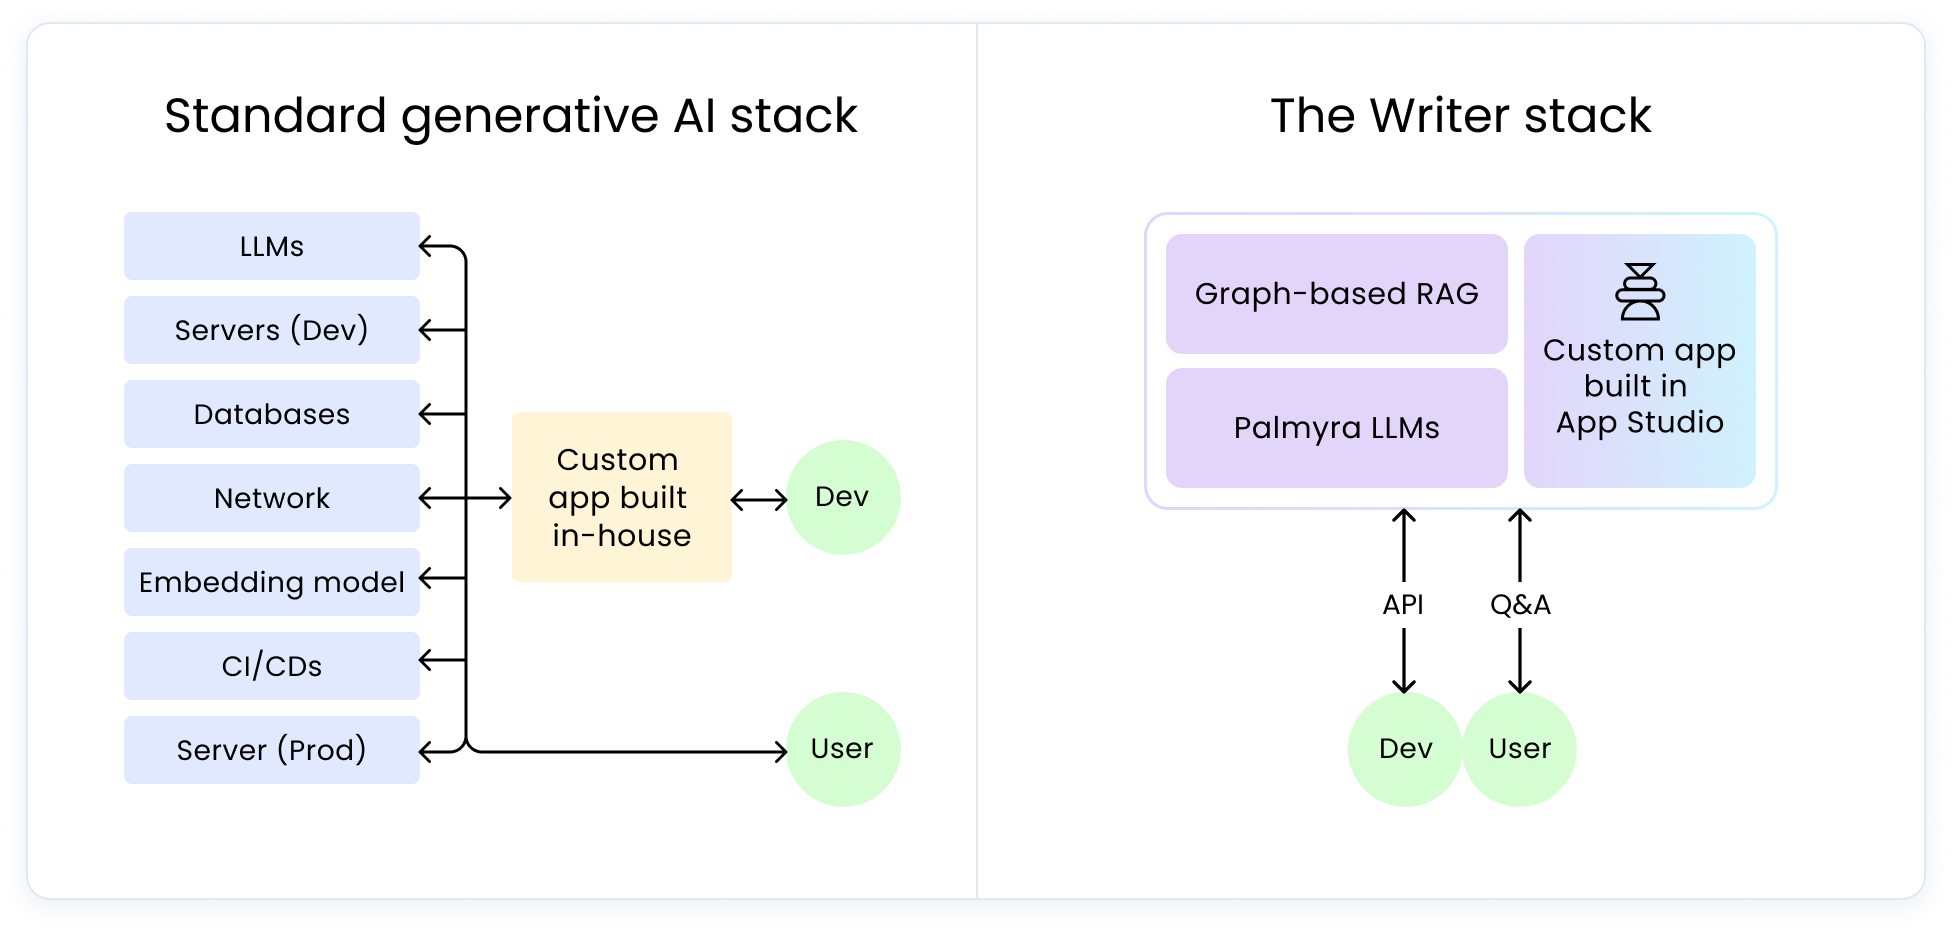 A diagram comparing the standard generative AI stack with The Writer stack.

On the left, you see the standard stack: LLMs, servers, databases, network, embedding model, CI/CD, and server (production).

On the right, we have The Writer stack, which includes a graph-based RAG, Palmyra LLMs, a custom app developed in App Studio, API, Q&A, and user.